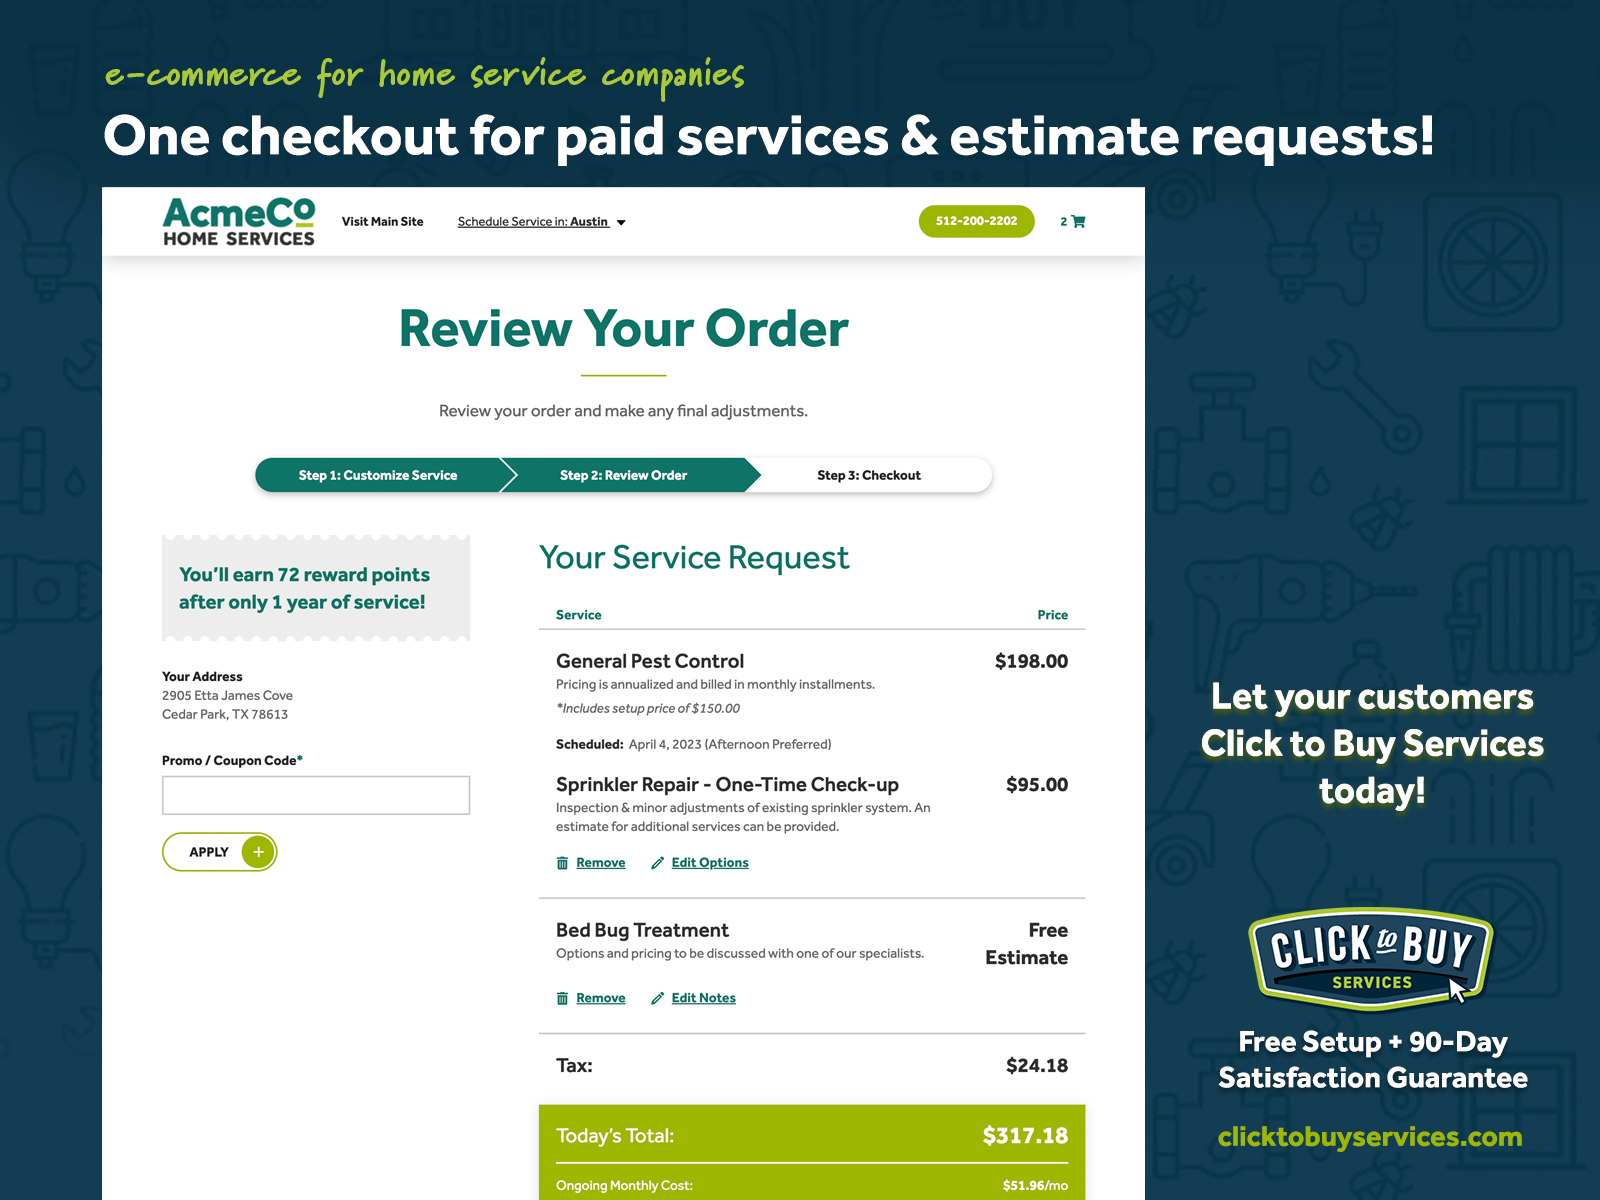 Click to Buy Services request details